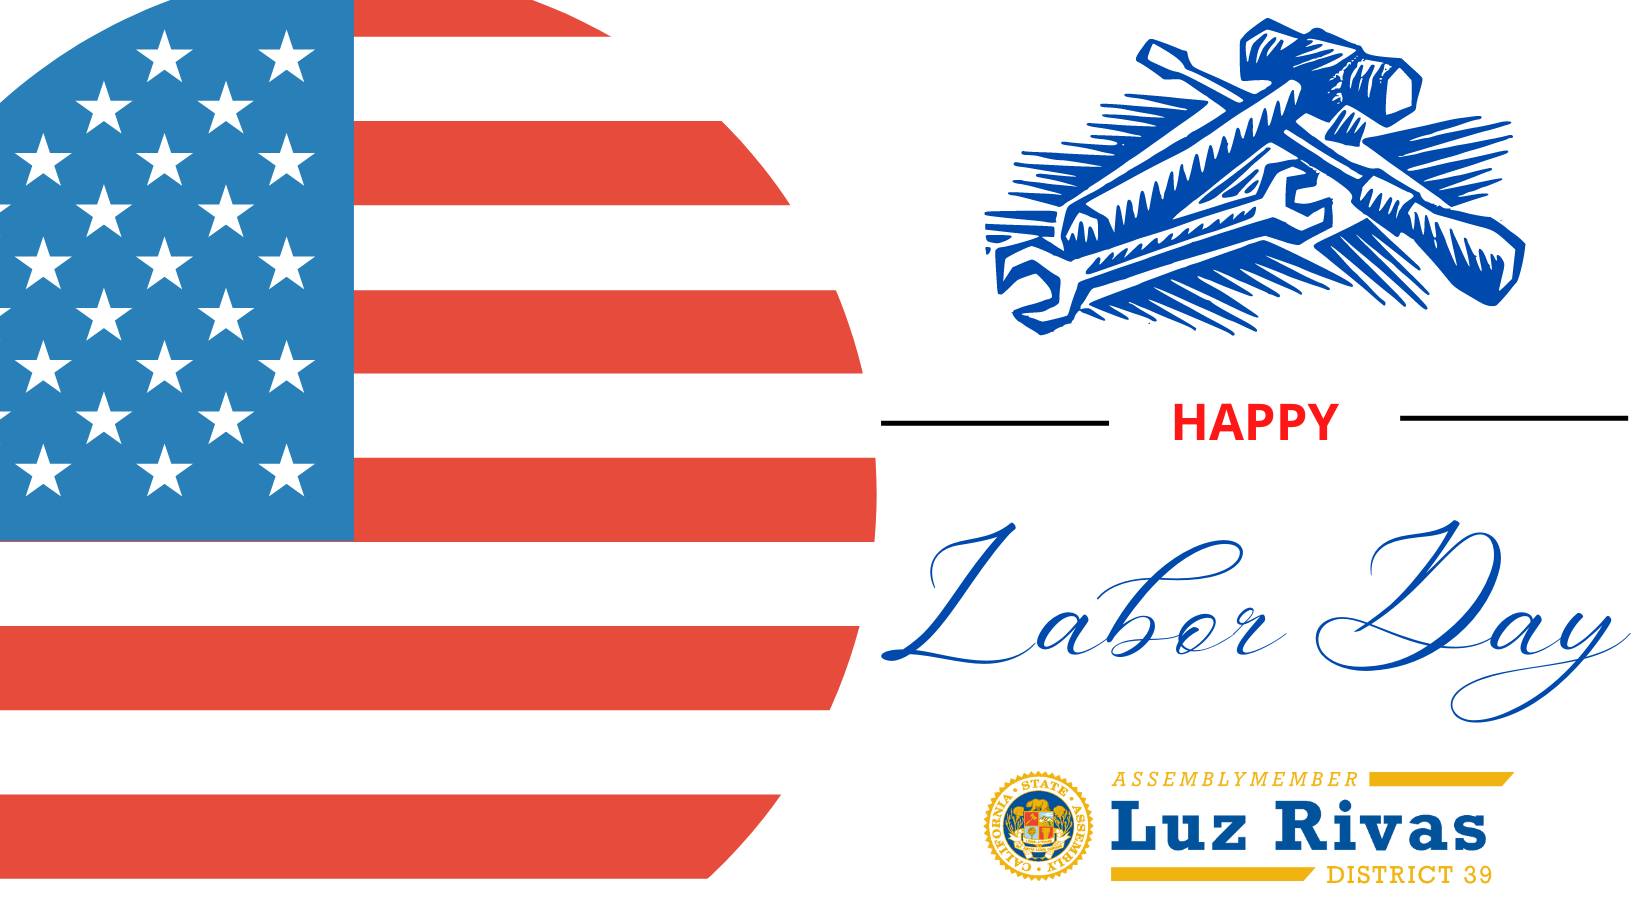 Wish You All A Happy Labor Day